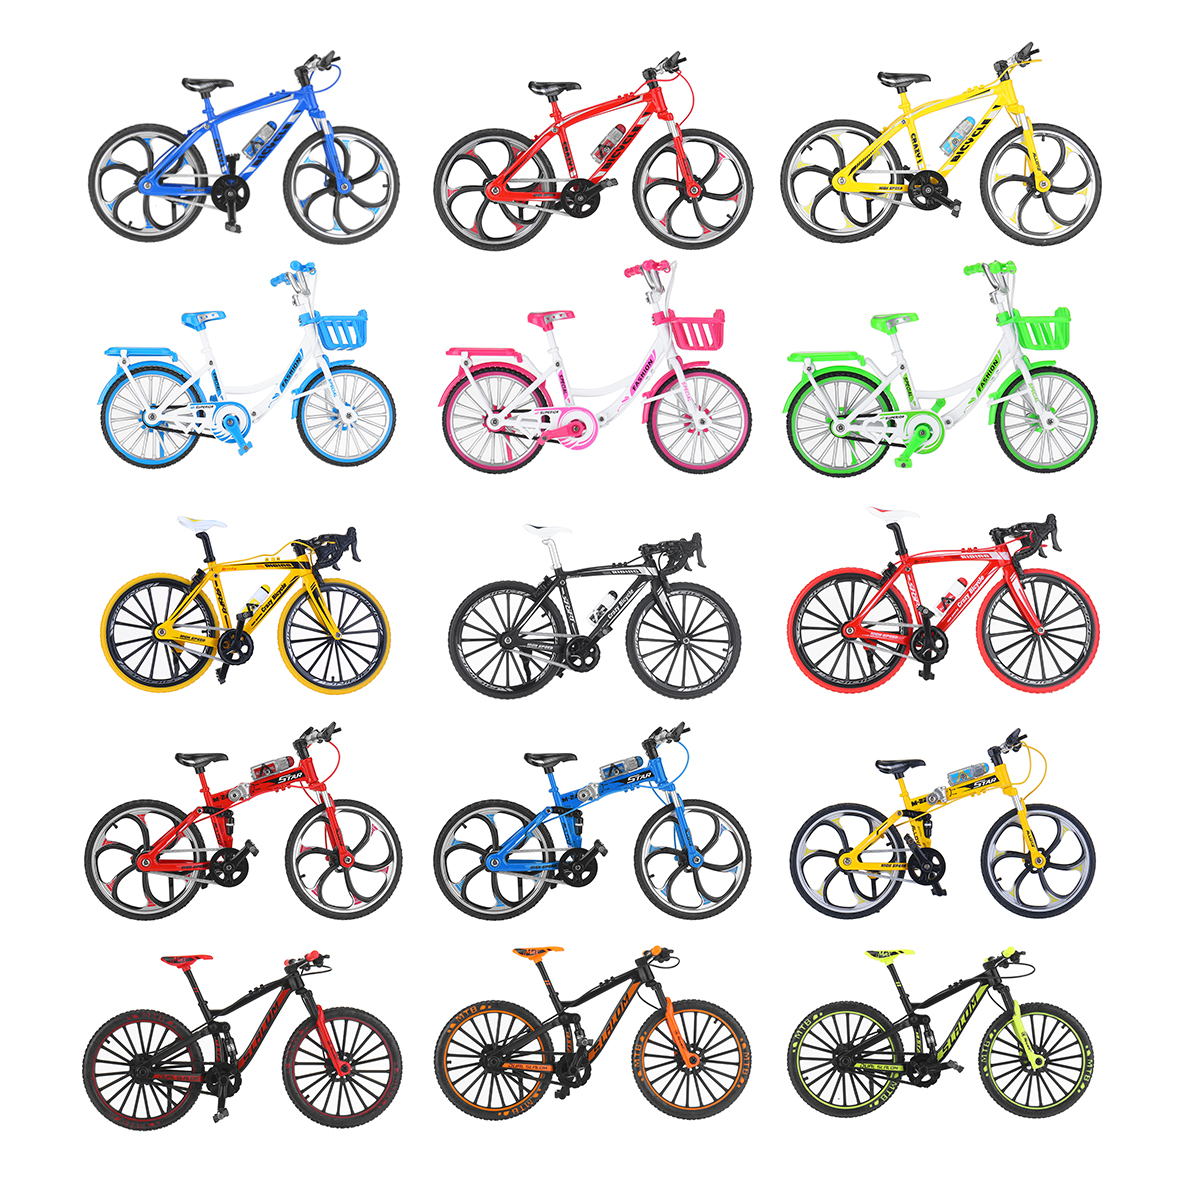 110-3D-Mini-Multi-color-Alloy-Mountain-Racing-Bicycle-Rotatable-Wheel-Diecast-Model-Toy-for-Decorati-1704789-2